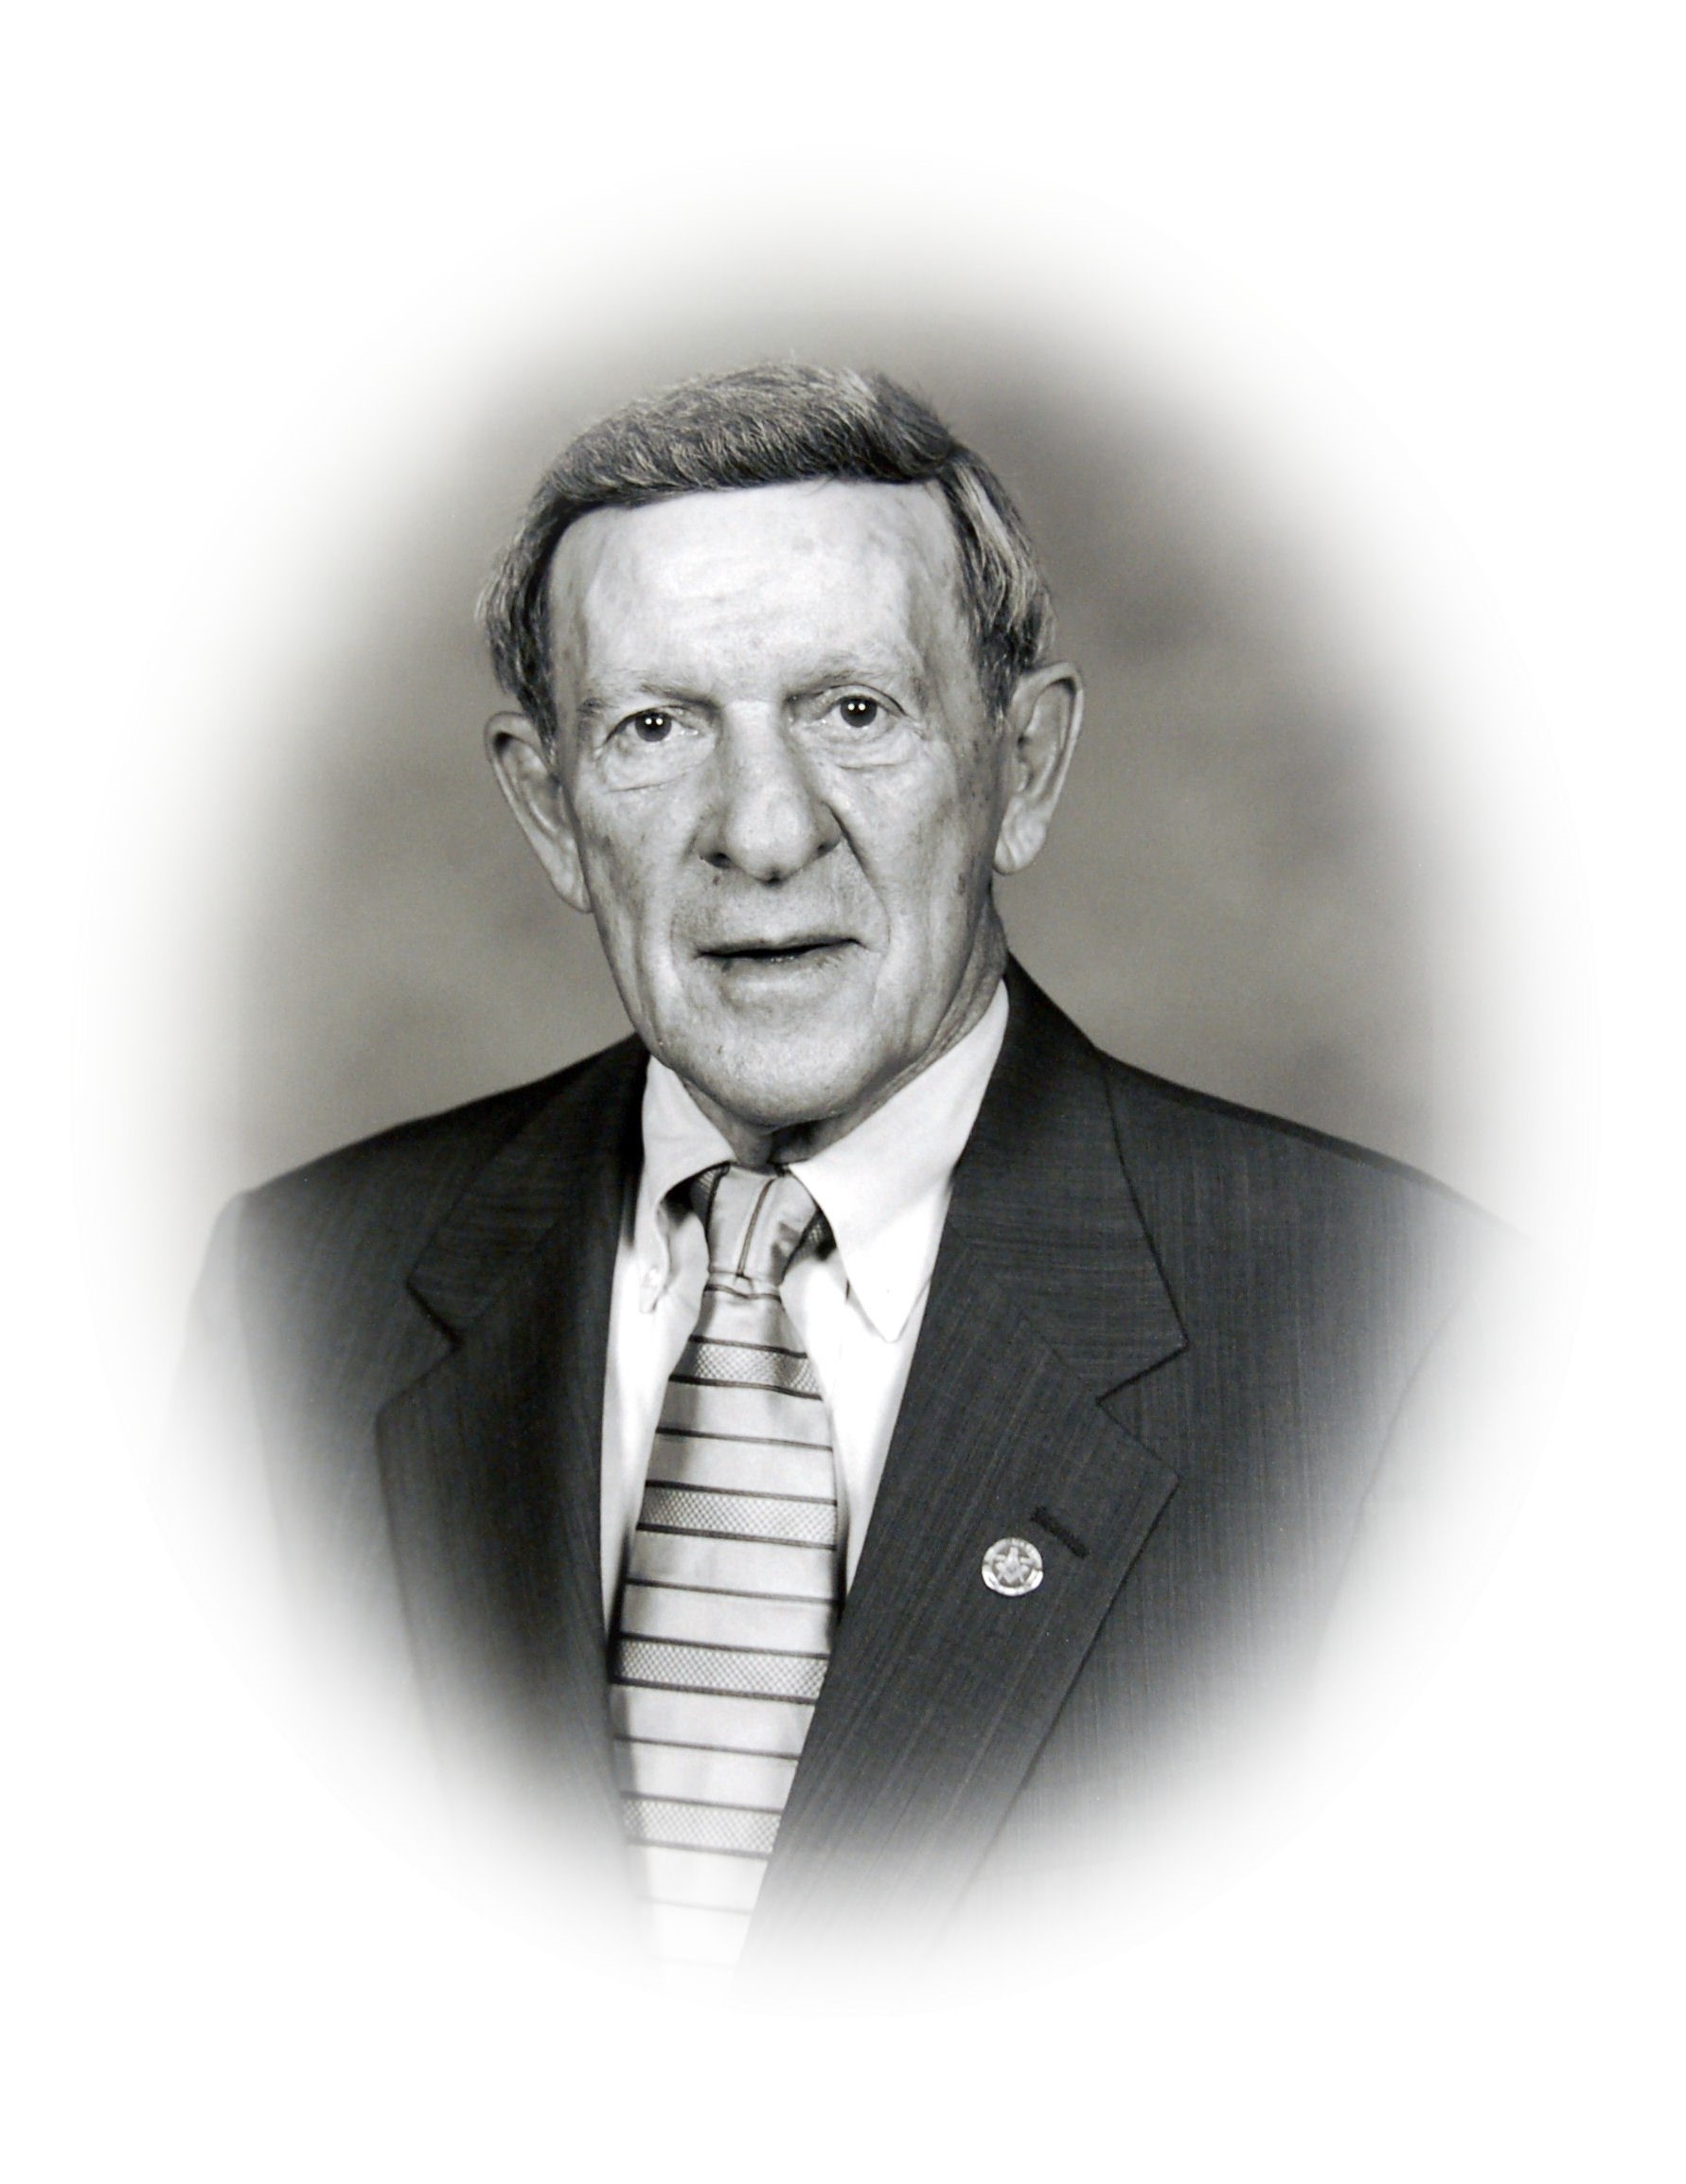 Billy C. Ford, PGM 2002-2003